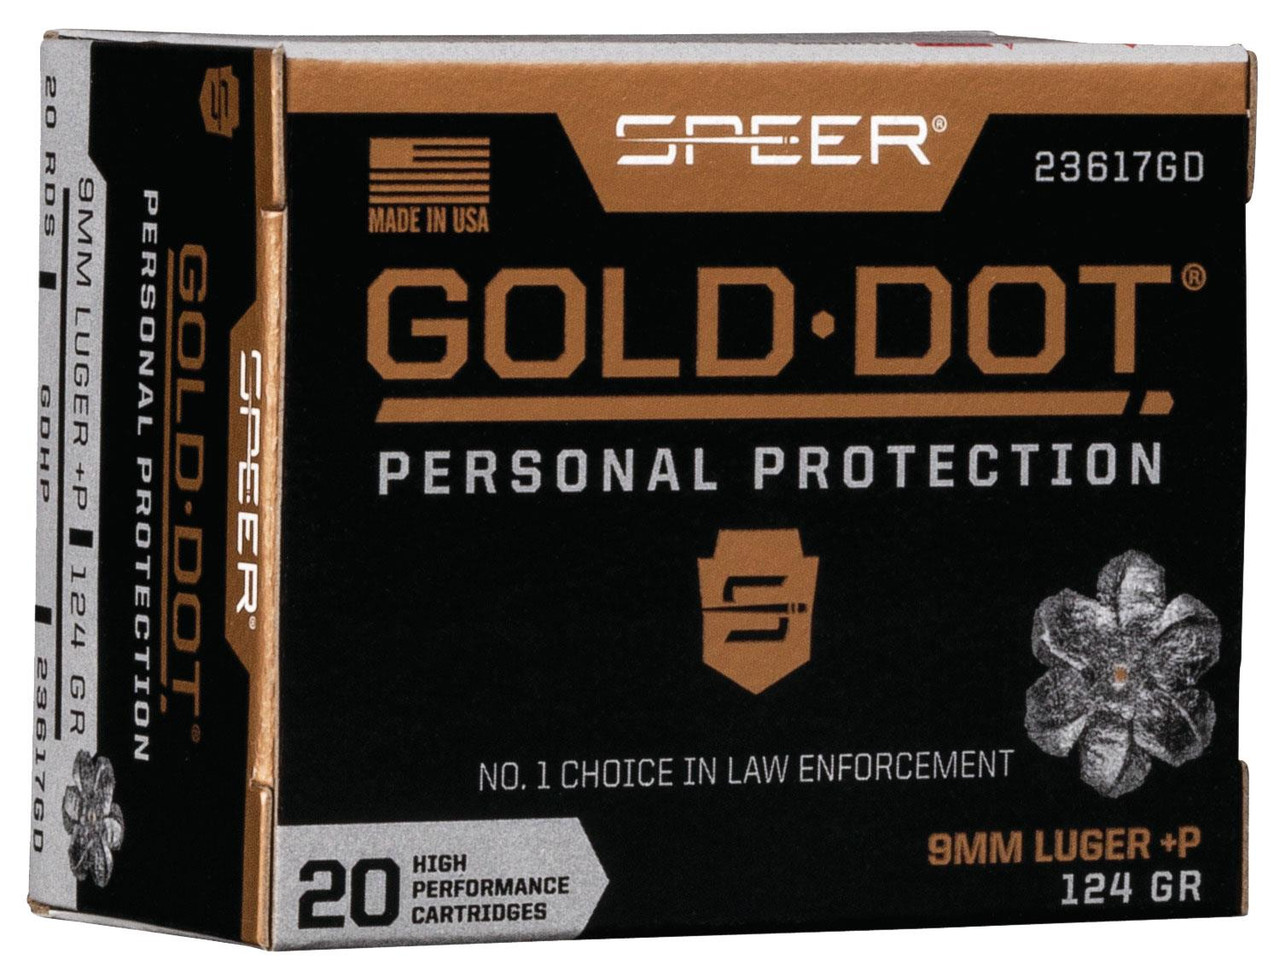 Speer Gold Dot Personal Protection 9mm Luger 23617GD